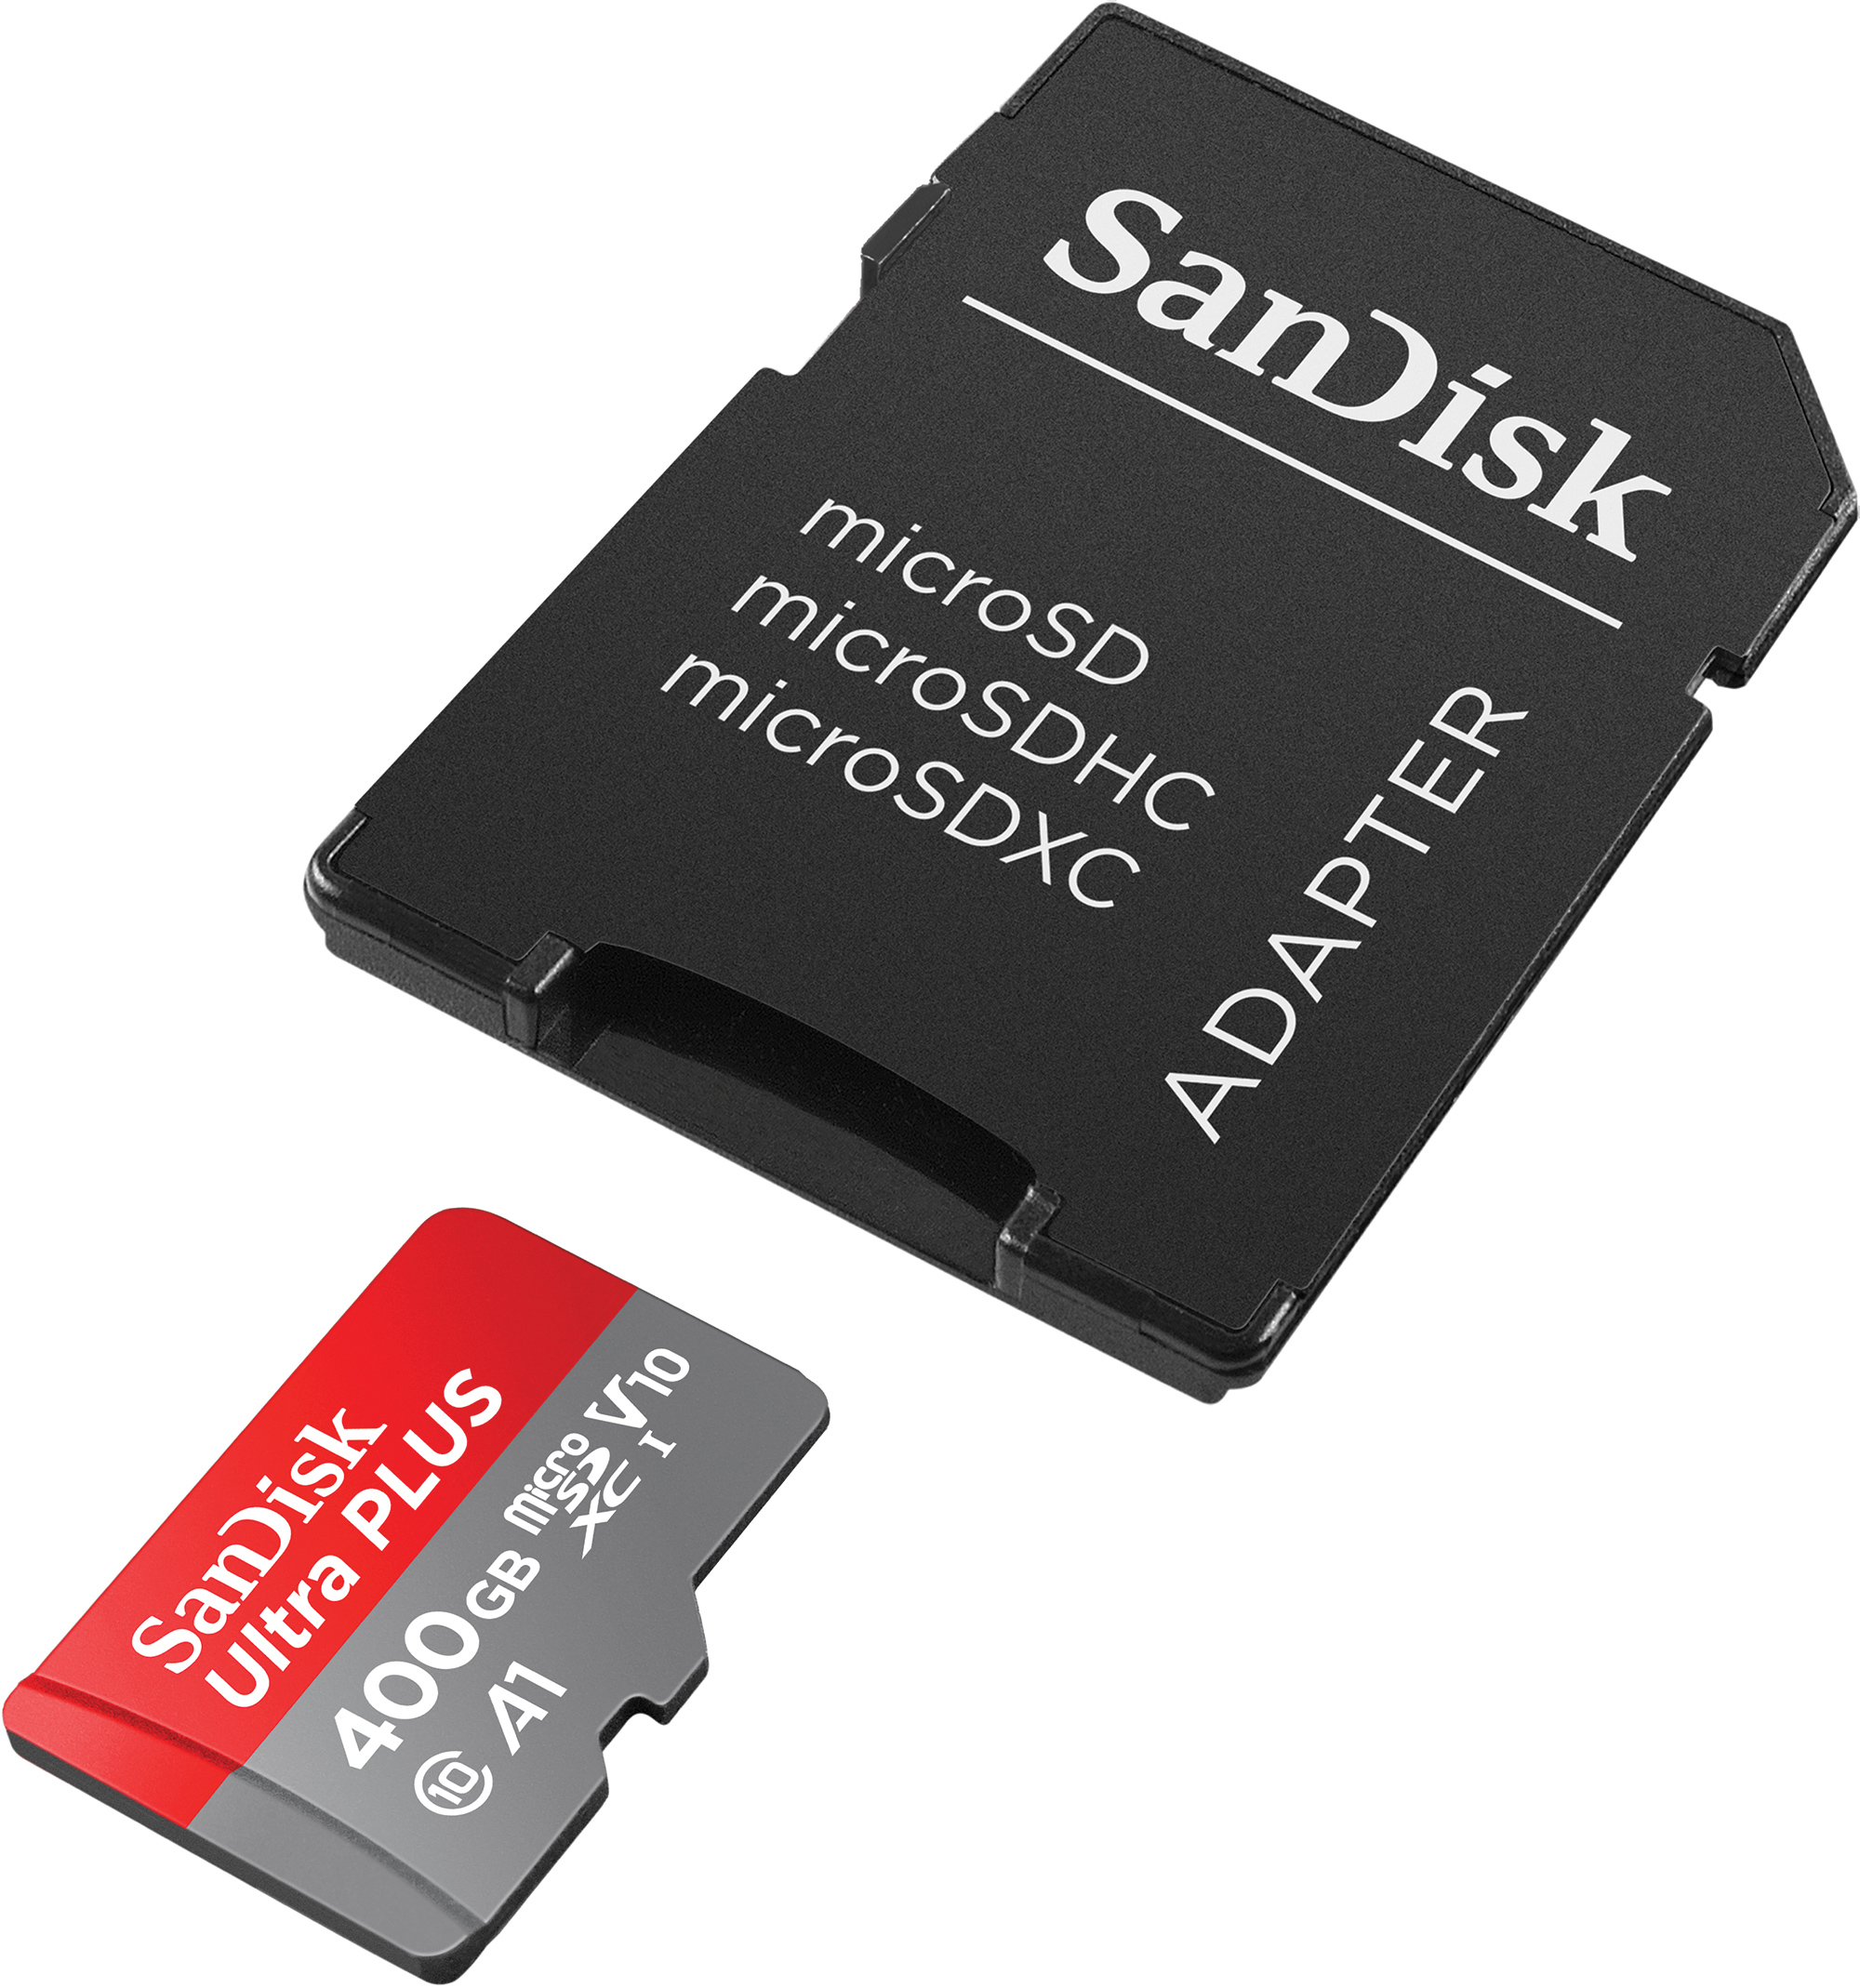 Western Digital Launches SanDisk Ultra microSD Card with 400 GB 